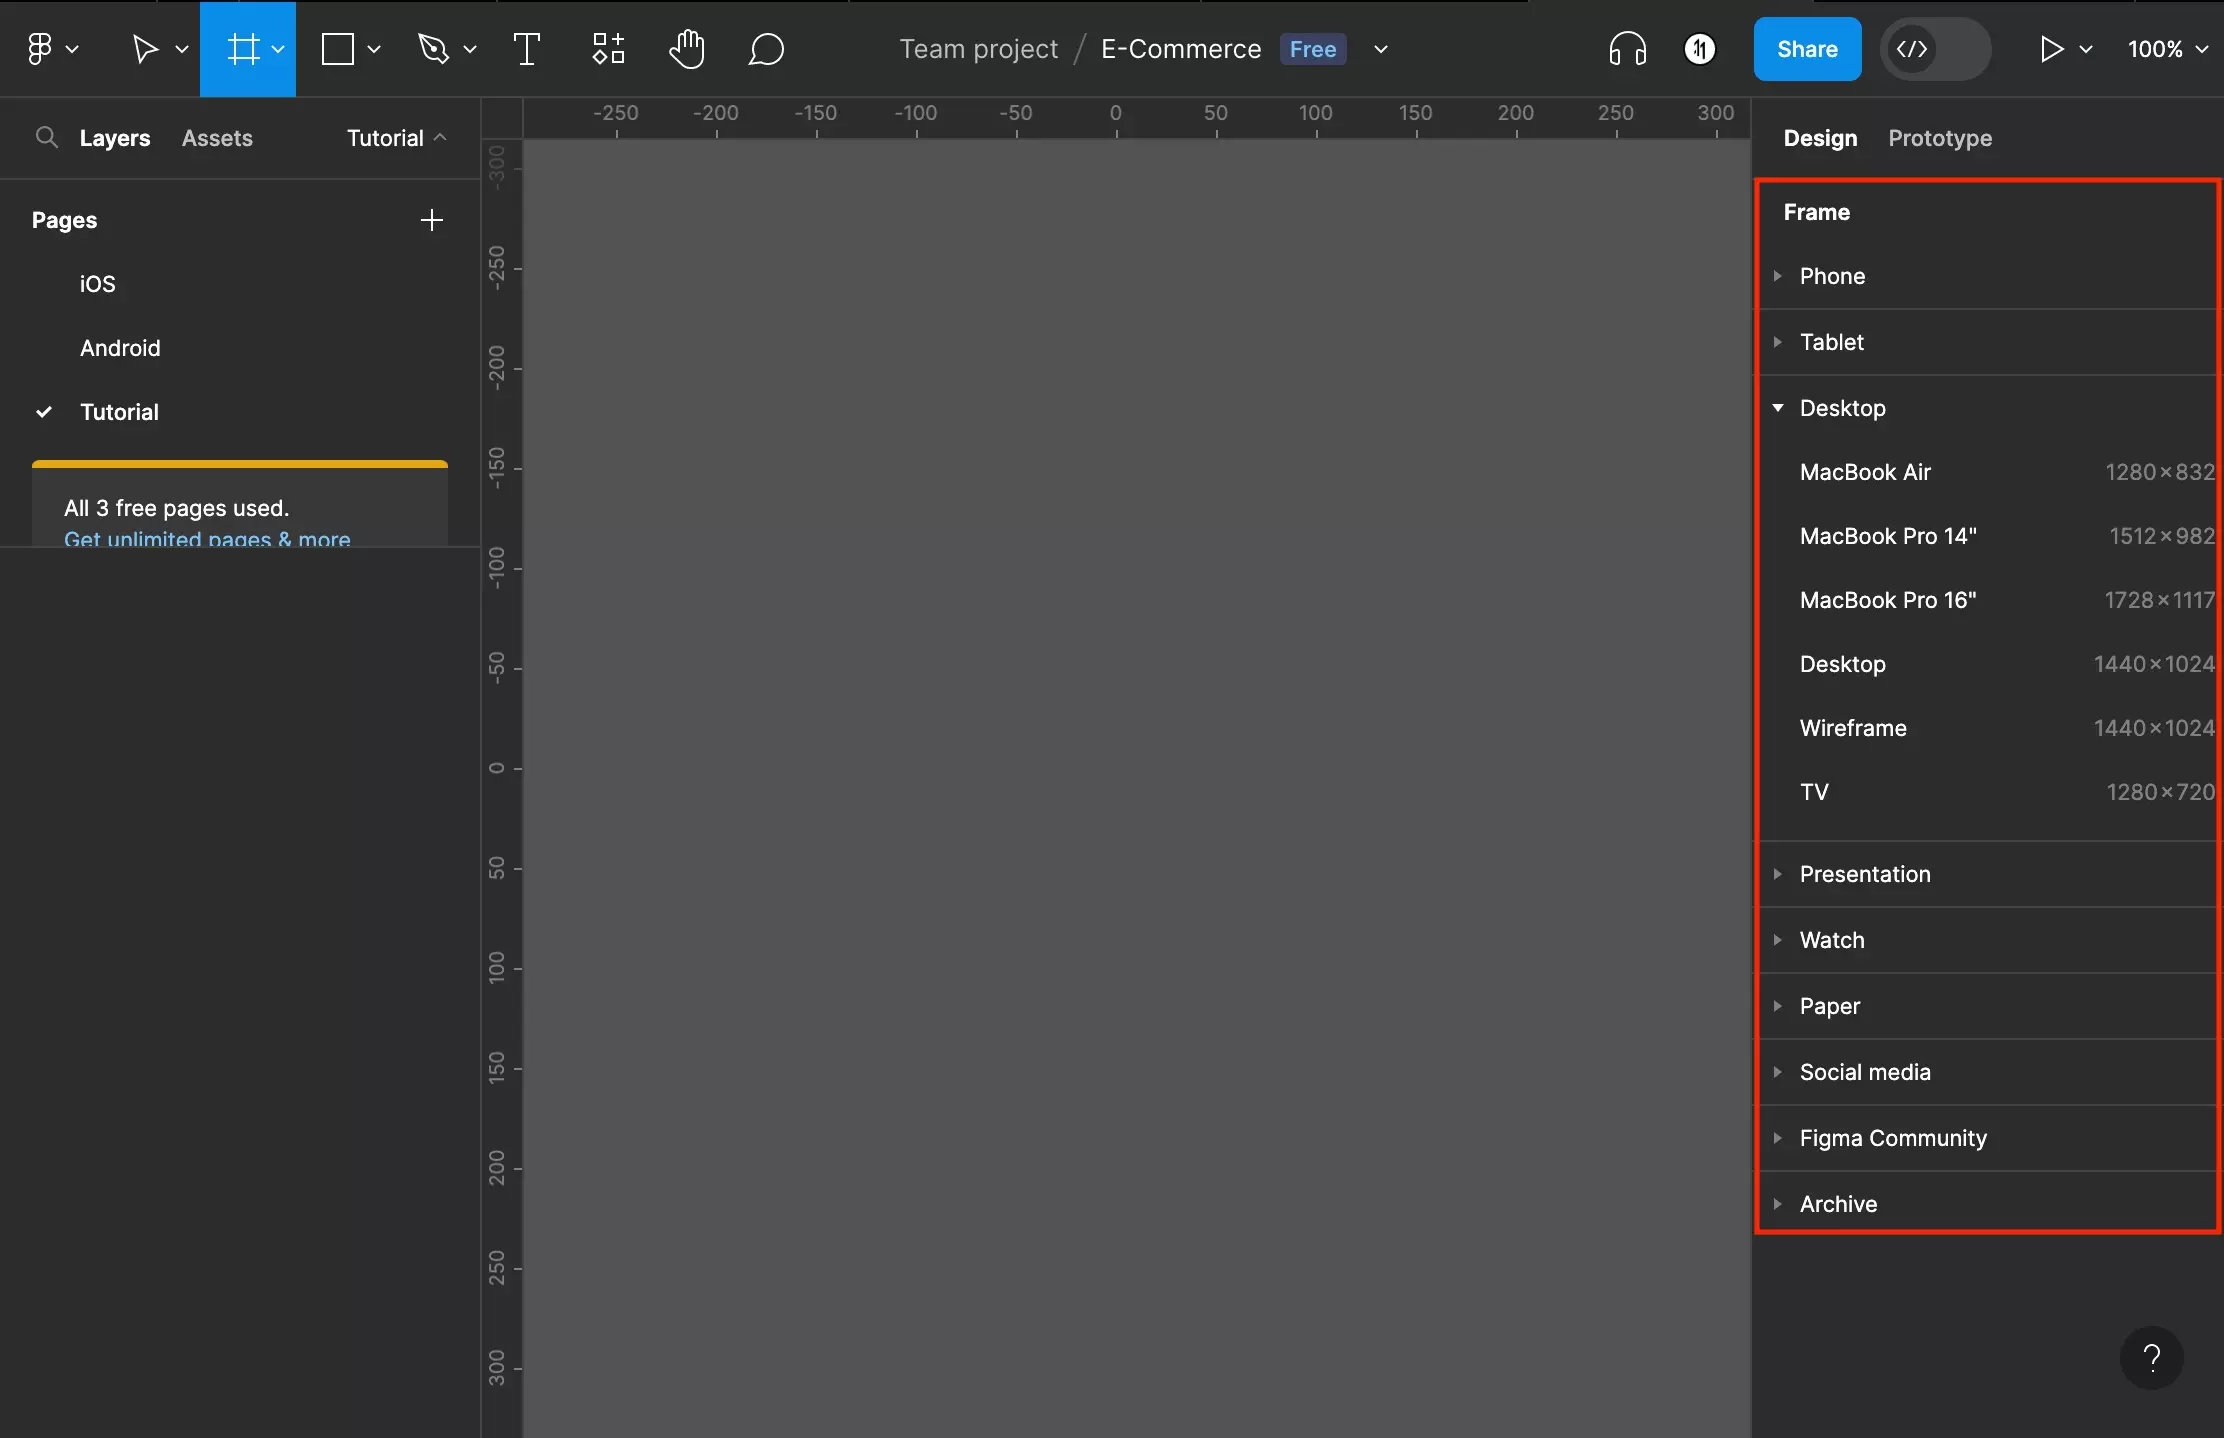 A screenshot of Figma that shows you how to select a frame preset. The options are found on the right side bar and allow you to select from preset sizes for common Phones, Tablets, Desktop computers, Presentations, Watches, Paper, Social Media, items from the Figma Community or an "Archive." Select a preset category to see what presets are available for that category and then click the one that you wish for it to draw the artboard on the Figma canvas.